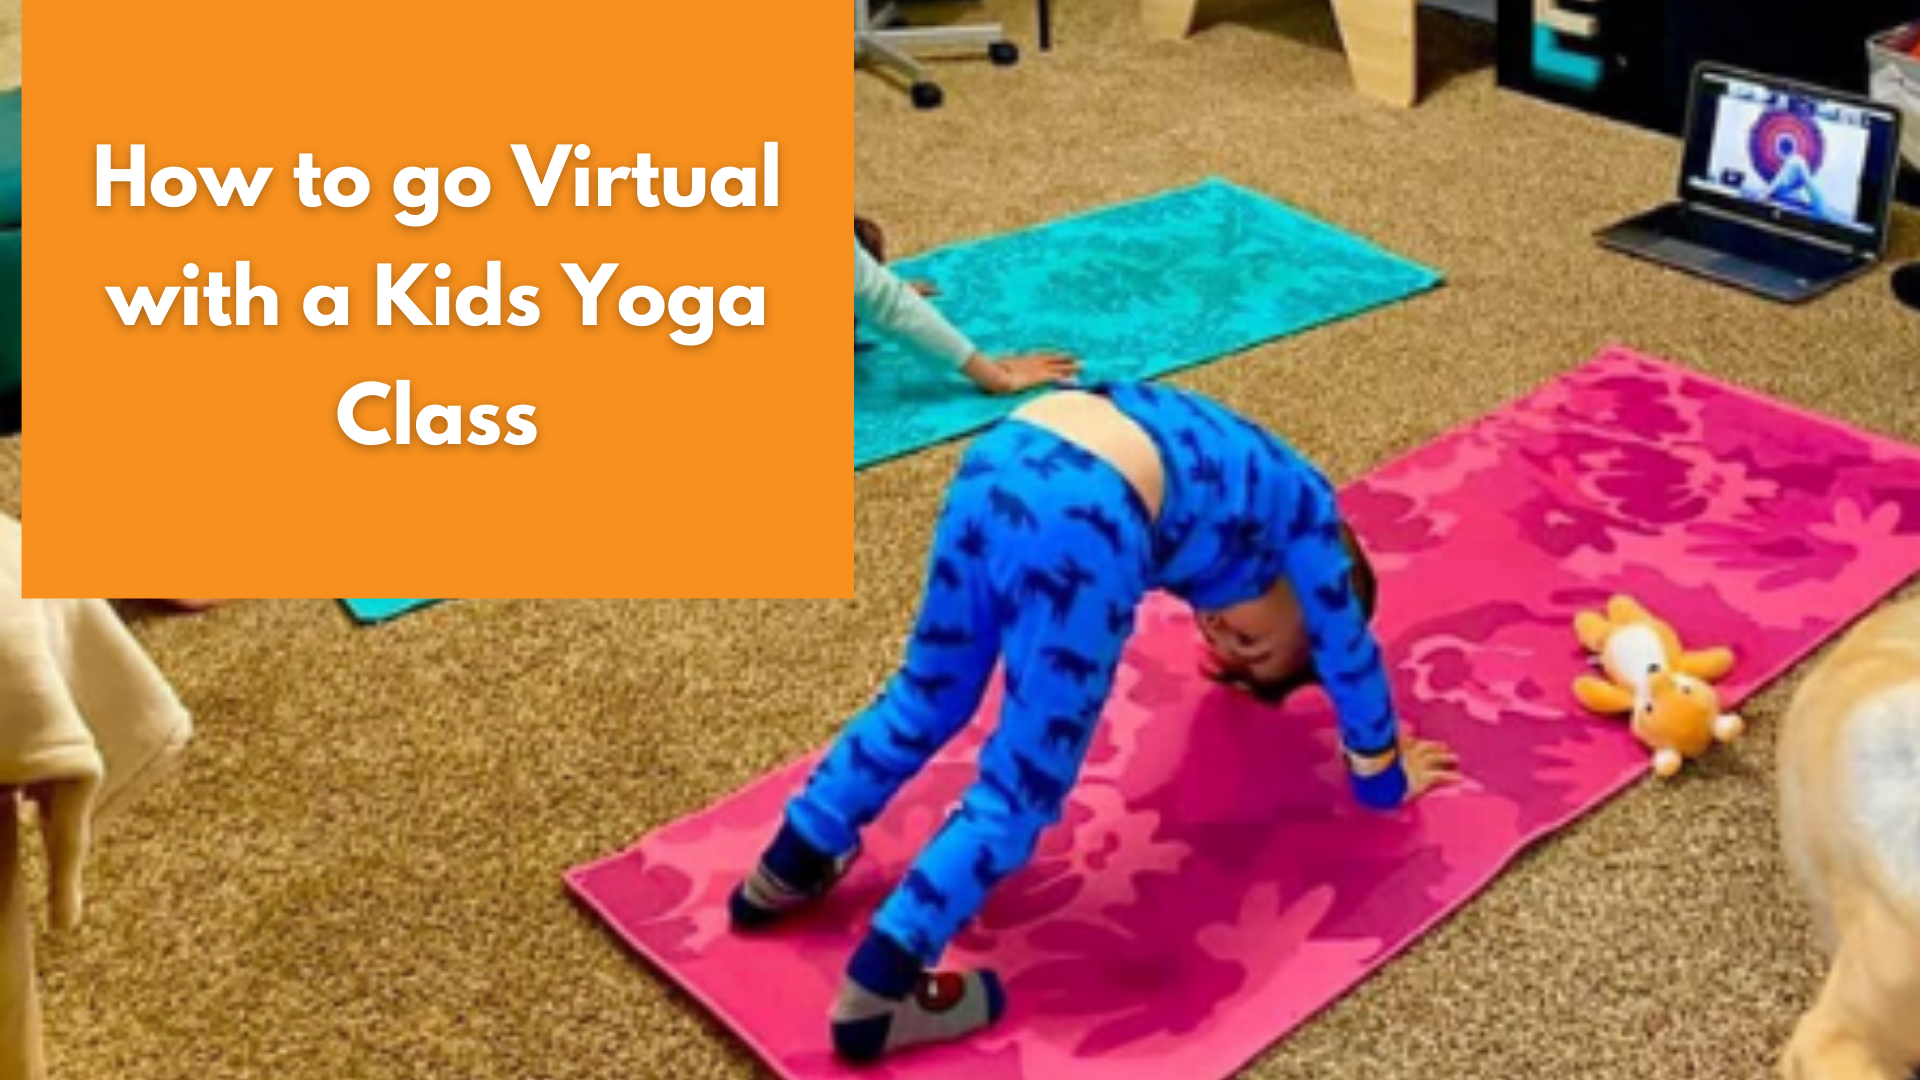 Virtual Workshop: How to go Virtual with a Kids Yoga Class | Kidding